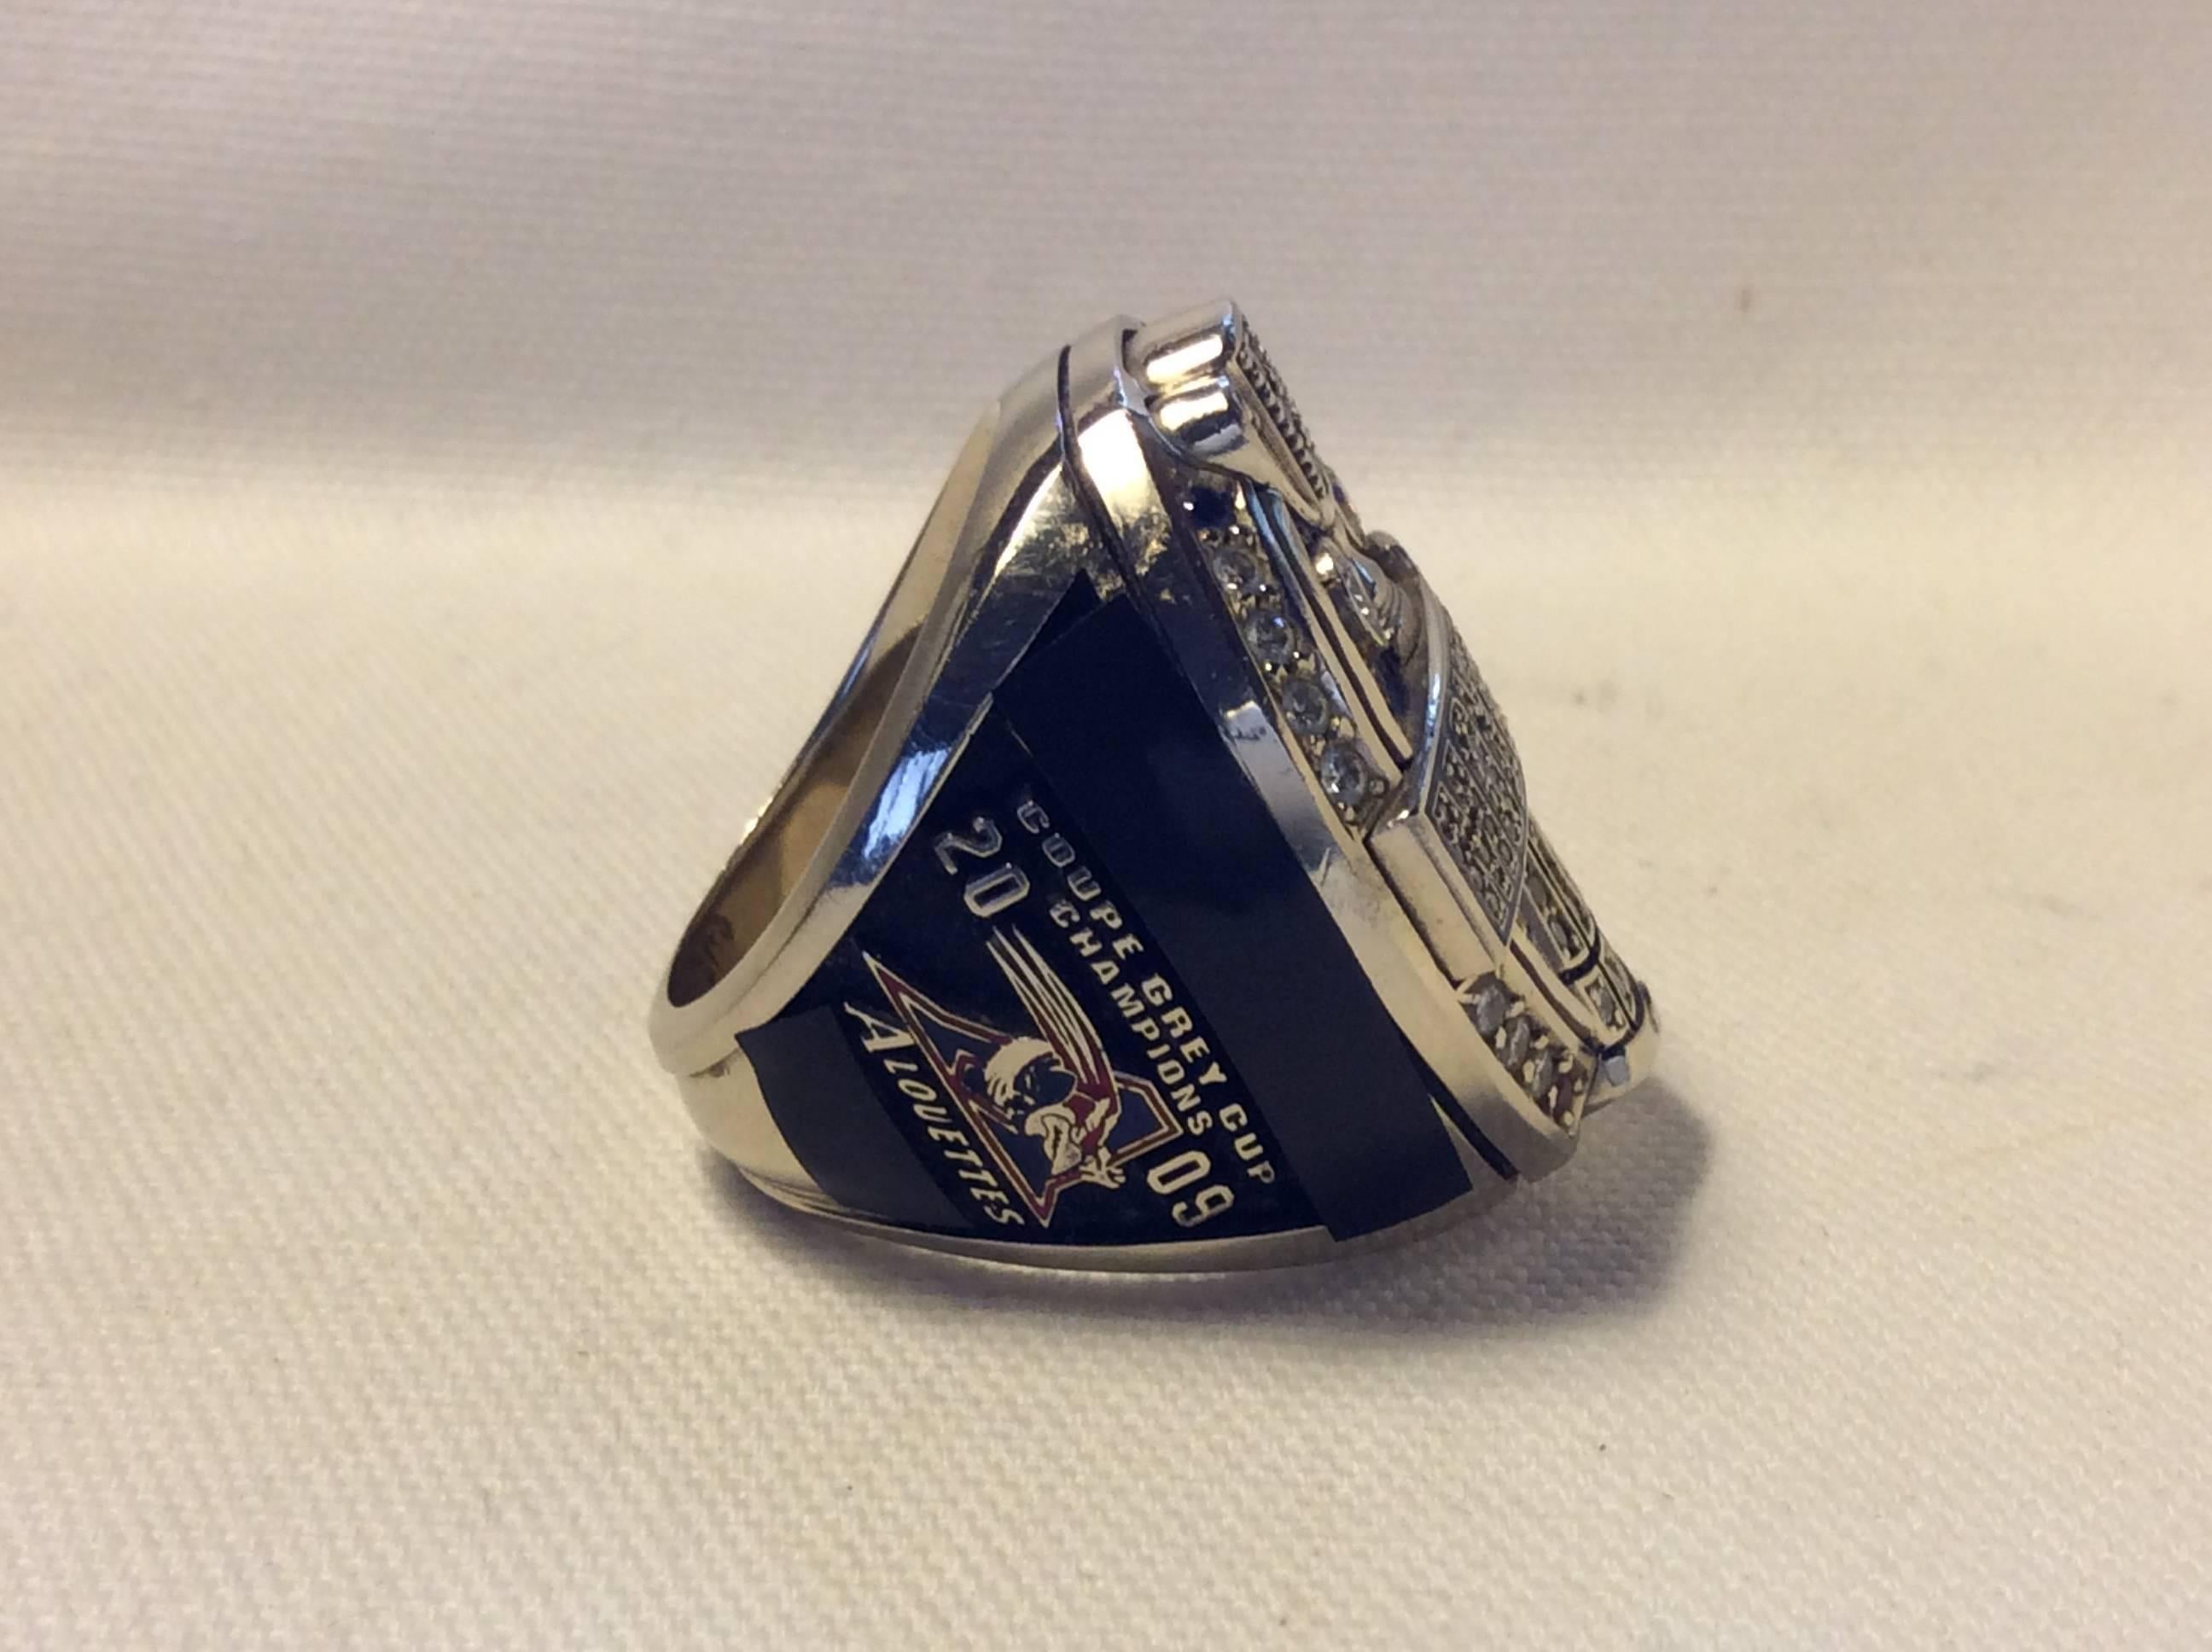 2009 Montreal Alouettes CFL Grey Cup Players Championship Ring For Sale 2